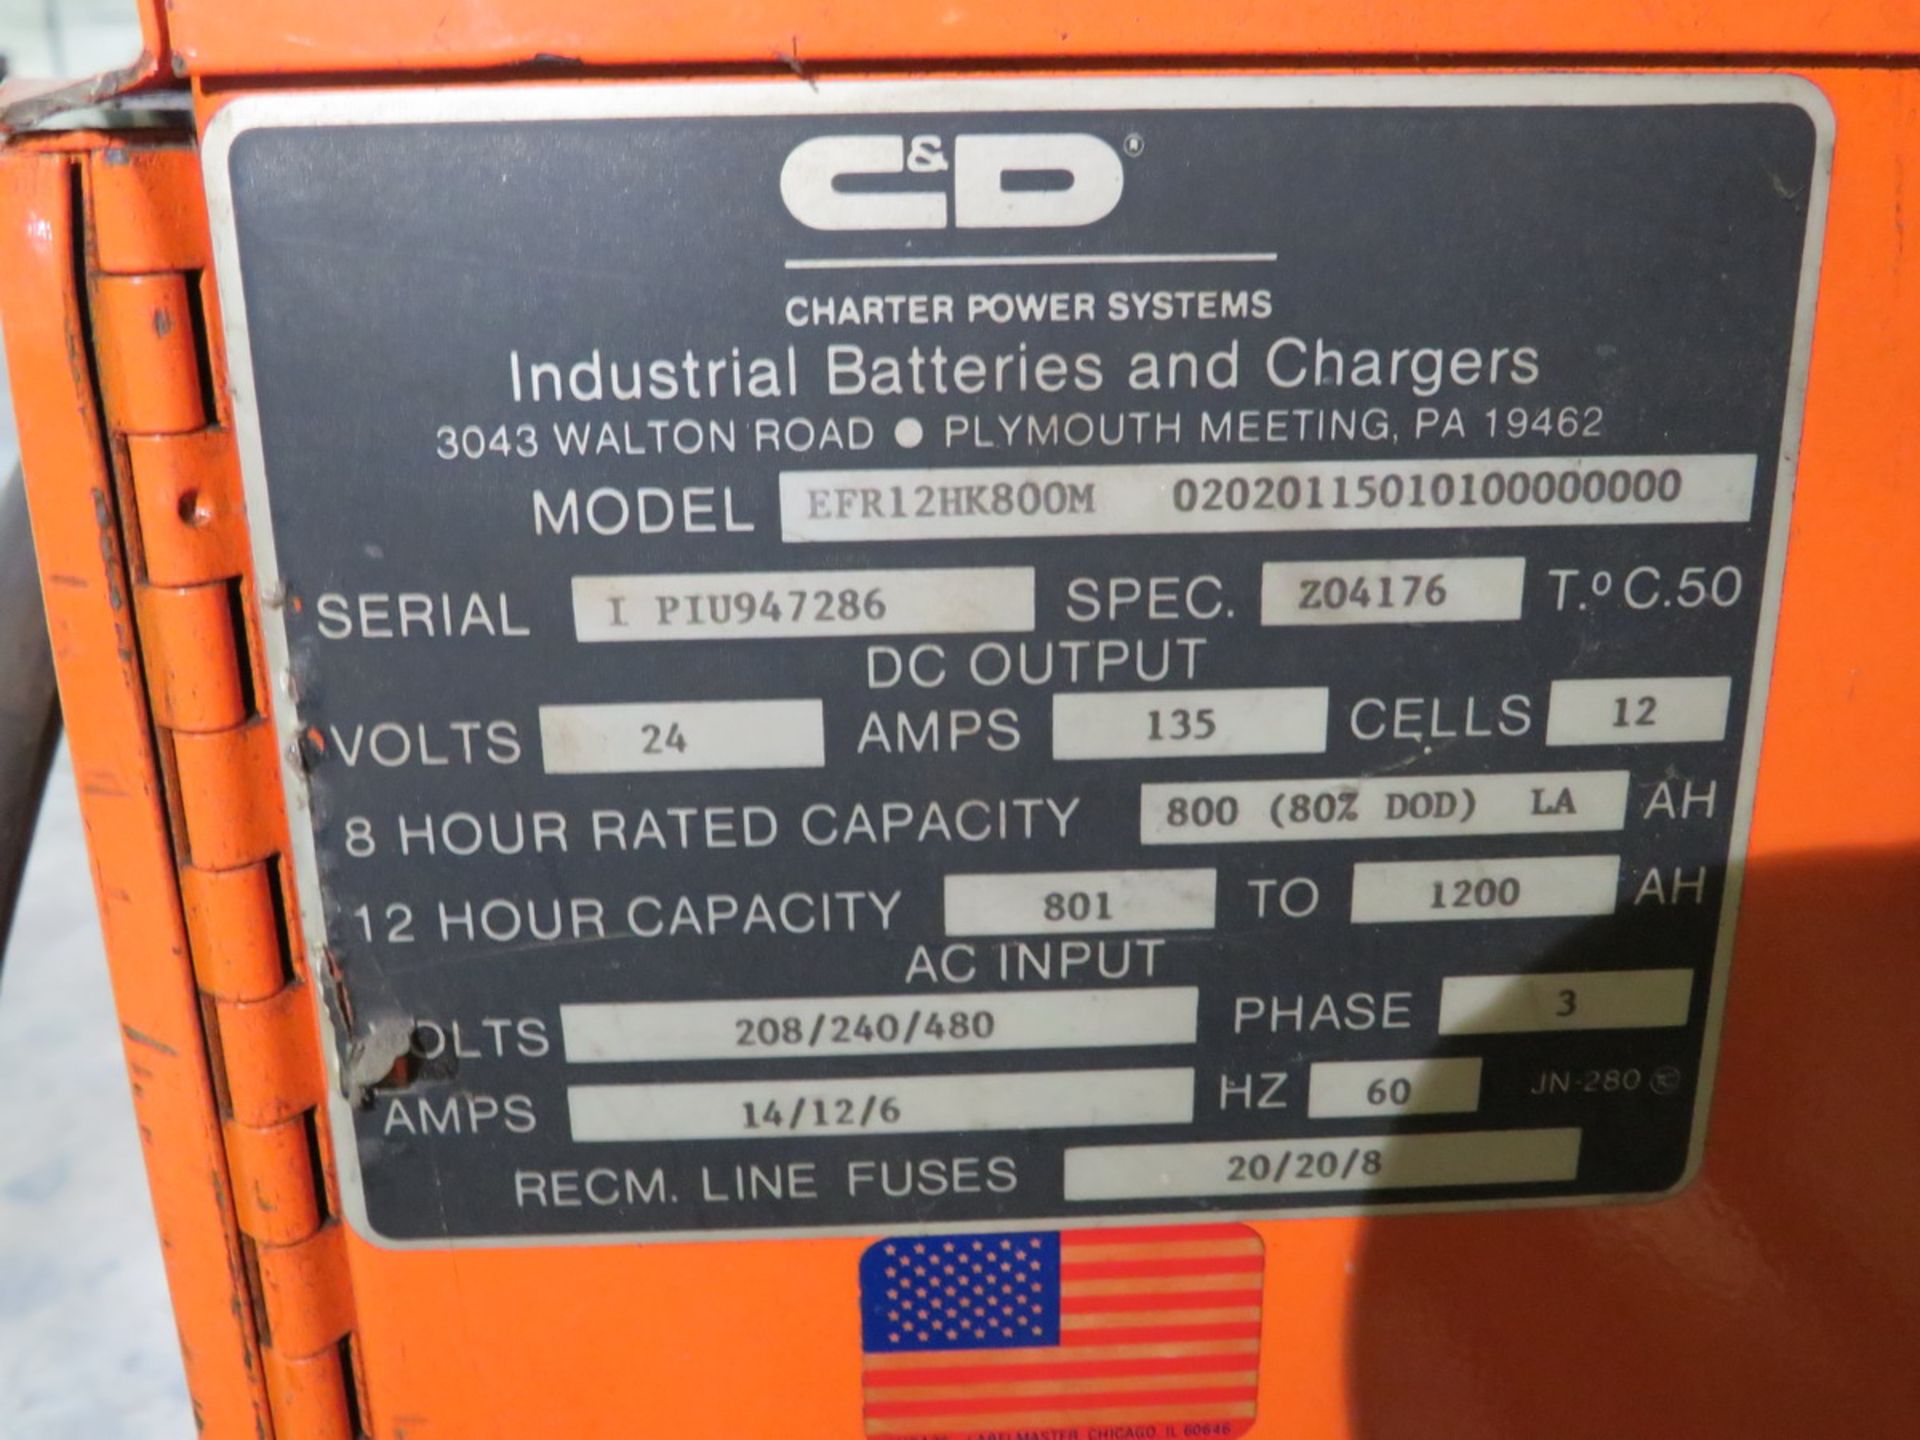 Ferro Five 24V Battery Charger 135A, 800 Amp Hours in 8 Hrs, 801-1200 Amp Hours in 12 Hrs [Loc: - Image 2 of 2